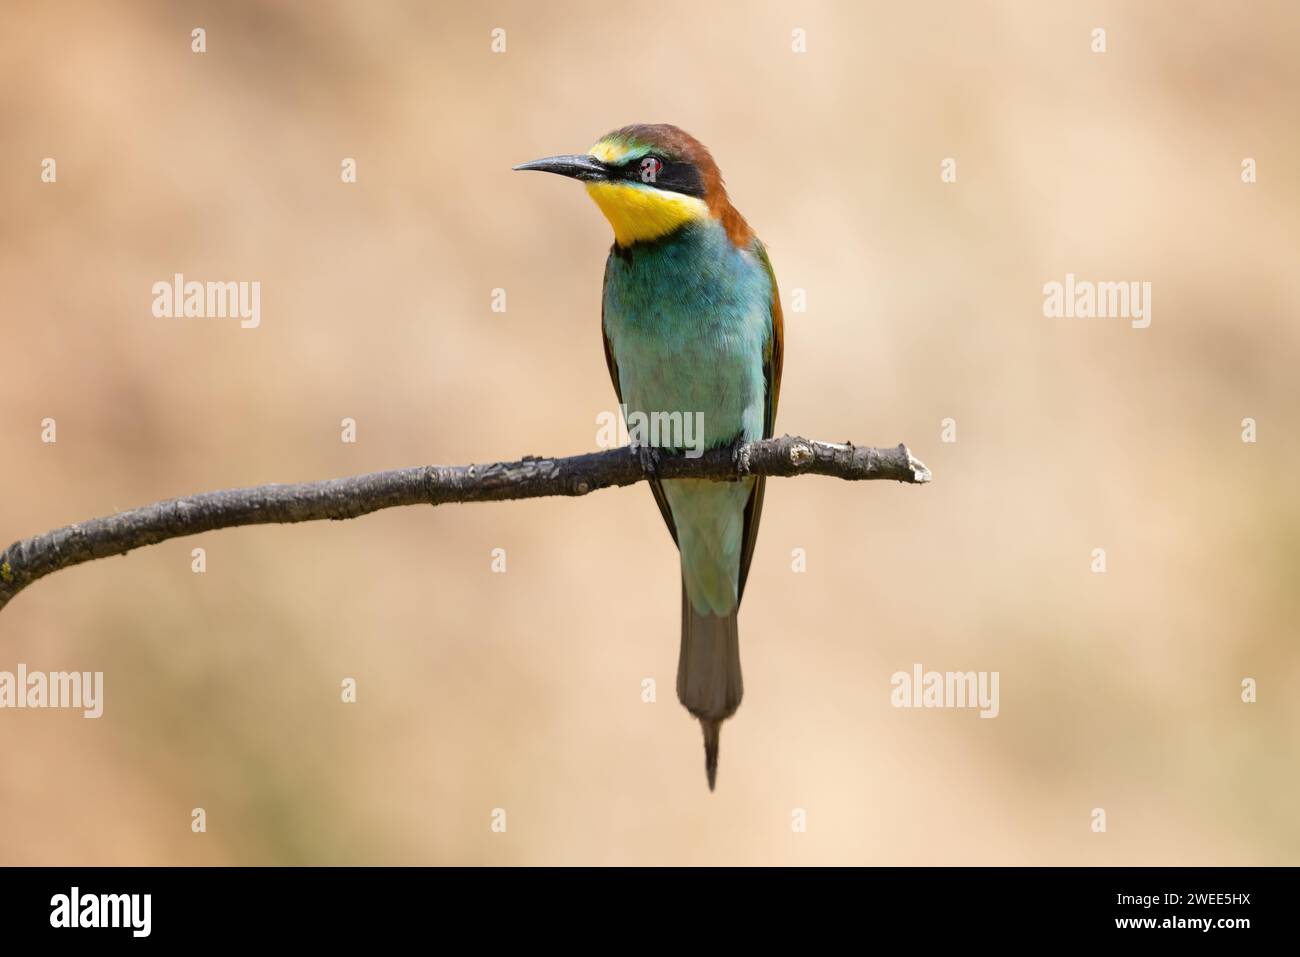 A bee eater perched on a branch, showcasing vibrant yellow, blue, and green feathers Stock Photo